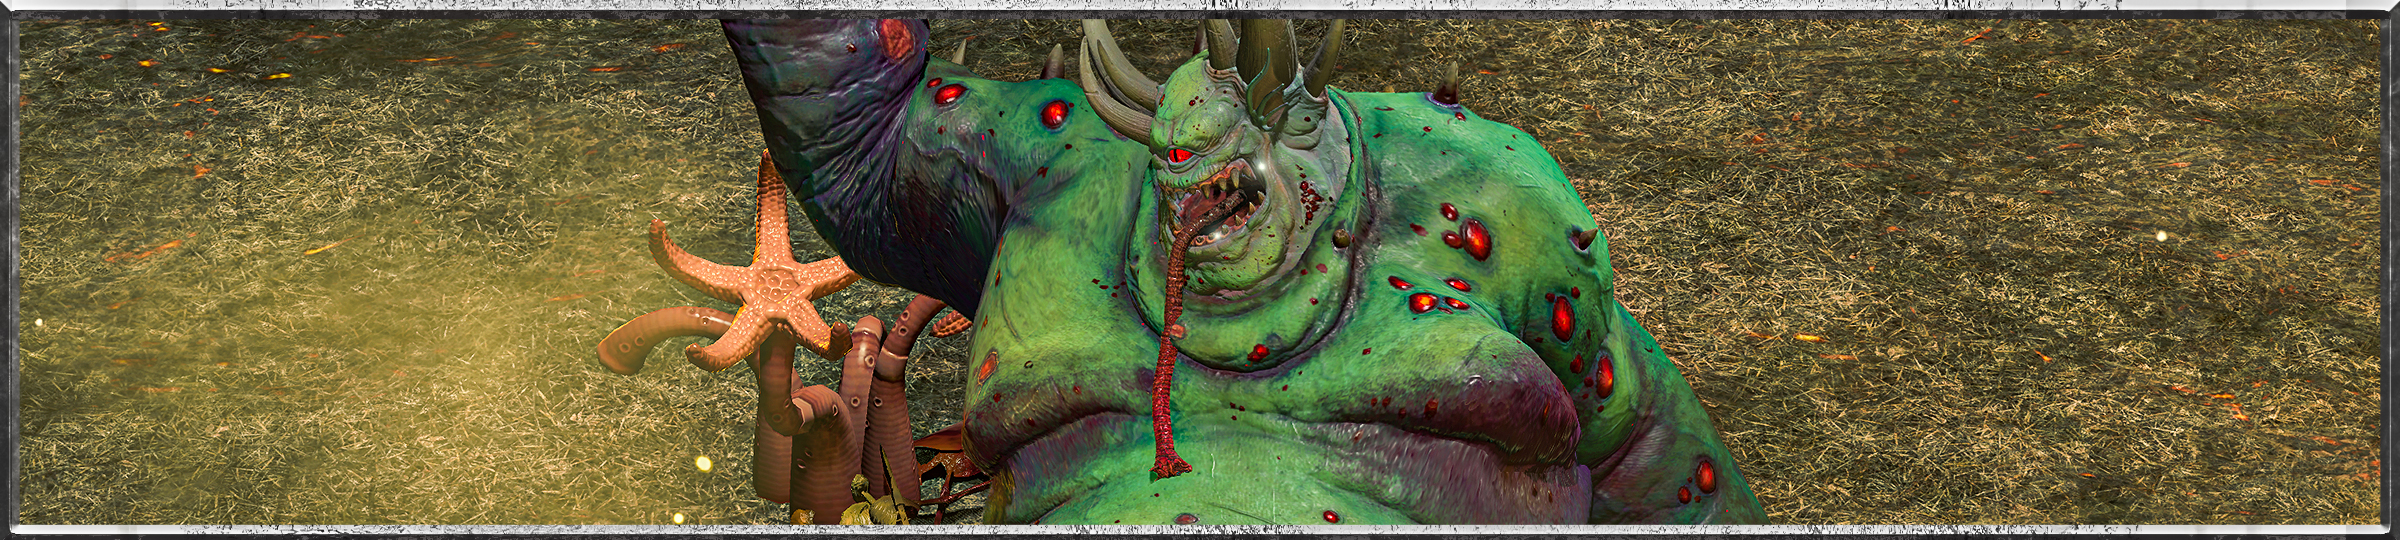 The Great Unclean One's bright green skin is punctuated by bright red pustules across the shoulders and arms, while a muddied, brown residue pools around the crevasses and under the creature's flabby breasts. On its head we see two large, slightly curled horns, a single red eye and a long red tongue, handing from its toothy, smiling jaw. A mist of yellow spores is seen in the background.